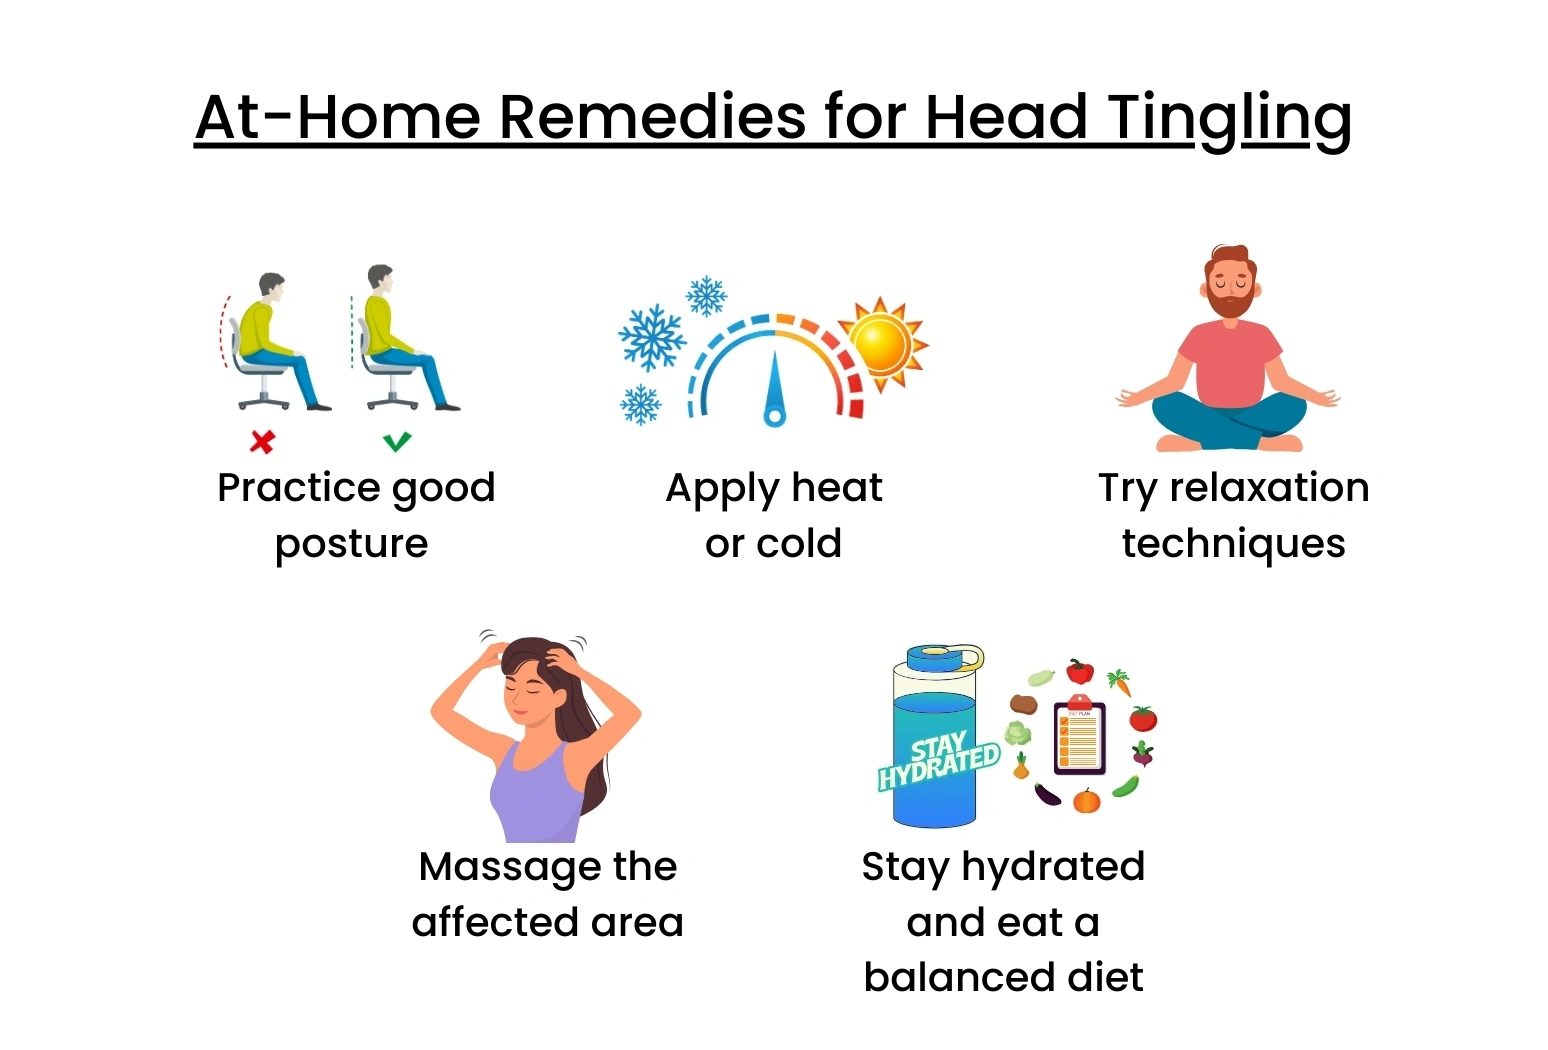 At-Home Remedies for Head